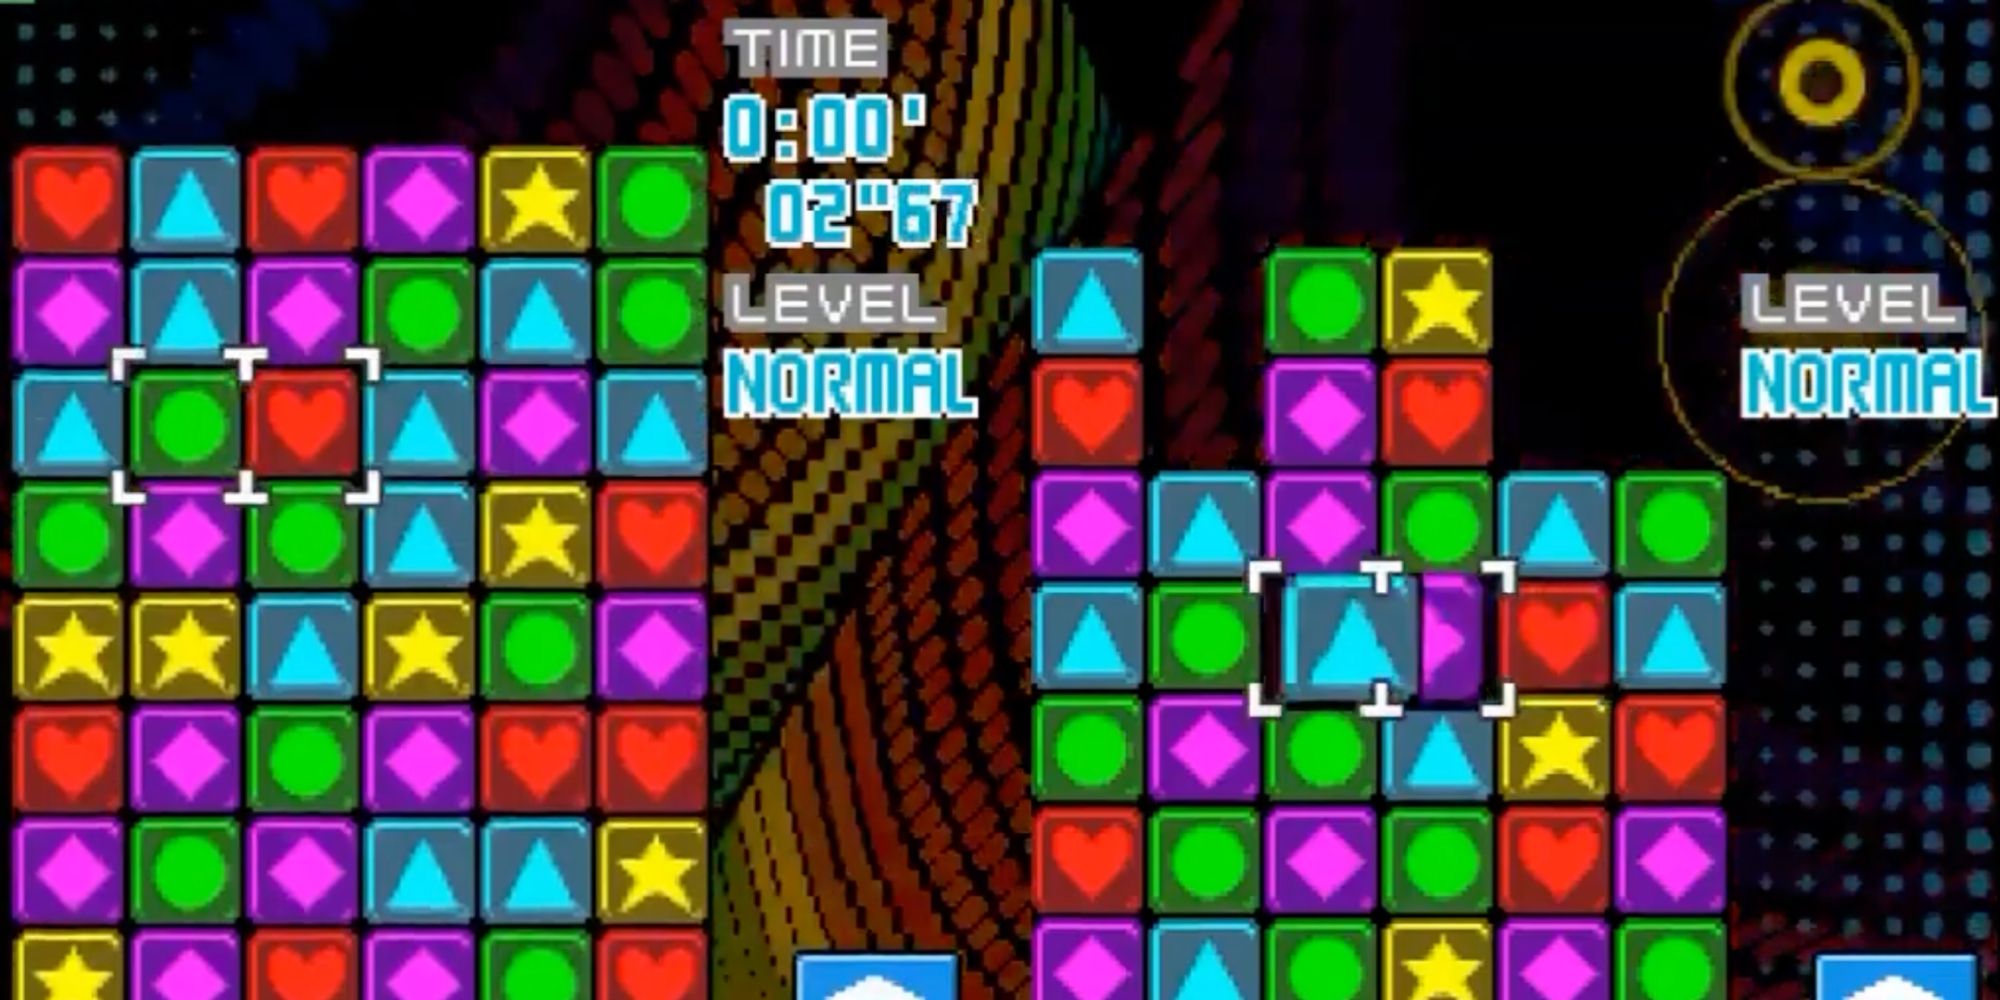 A screenshot from Planet Puzzle League, showing two players attempting to clear their board of colored tiles